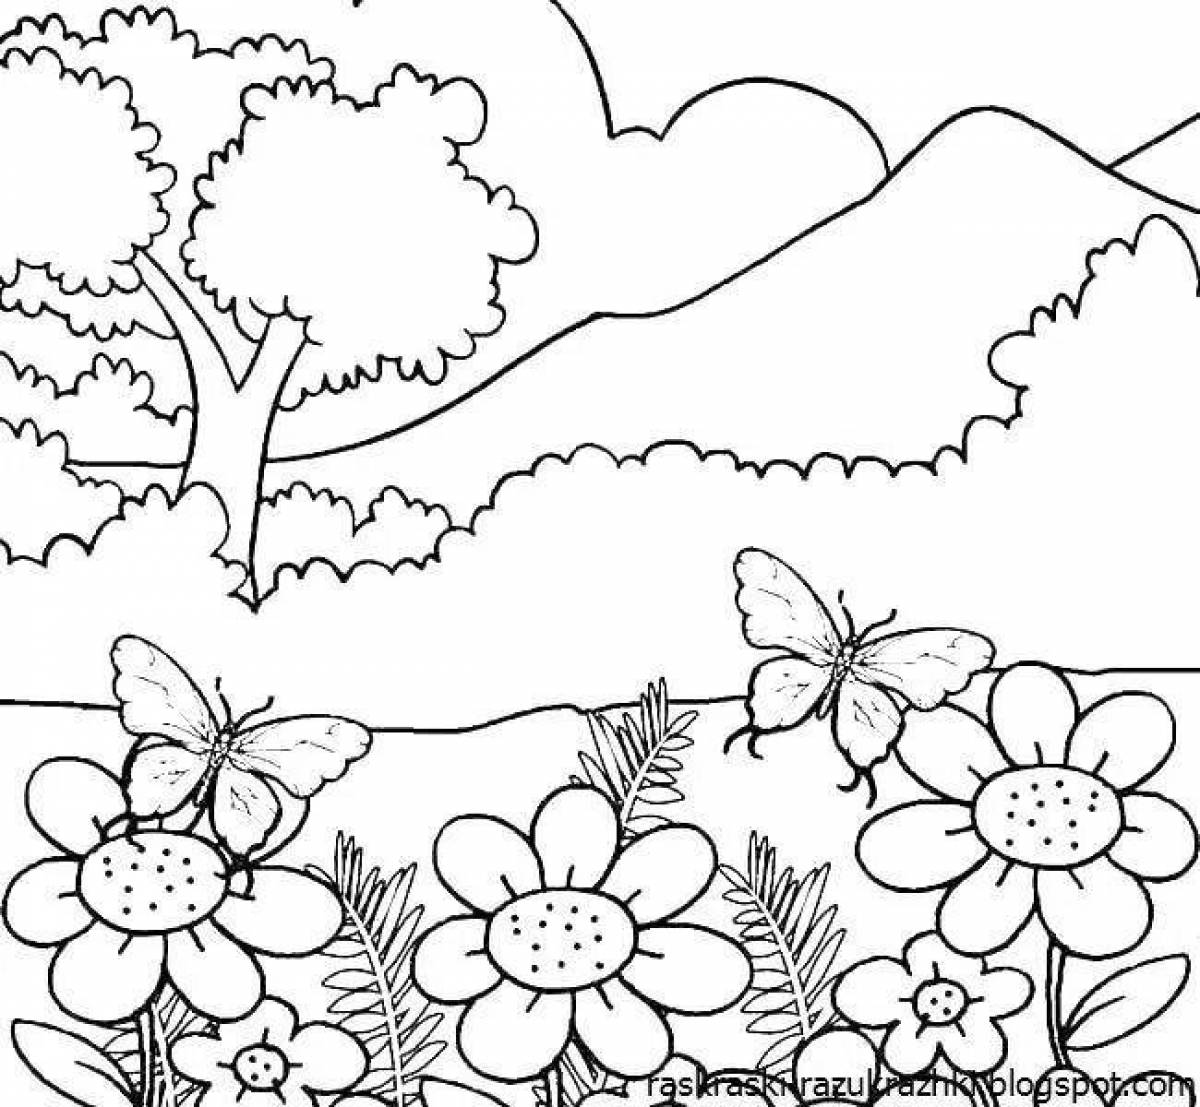 Amazing nature coloring for girls